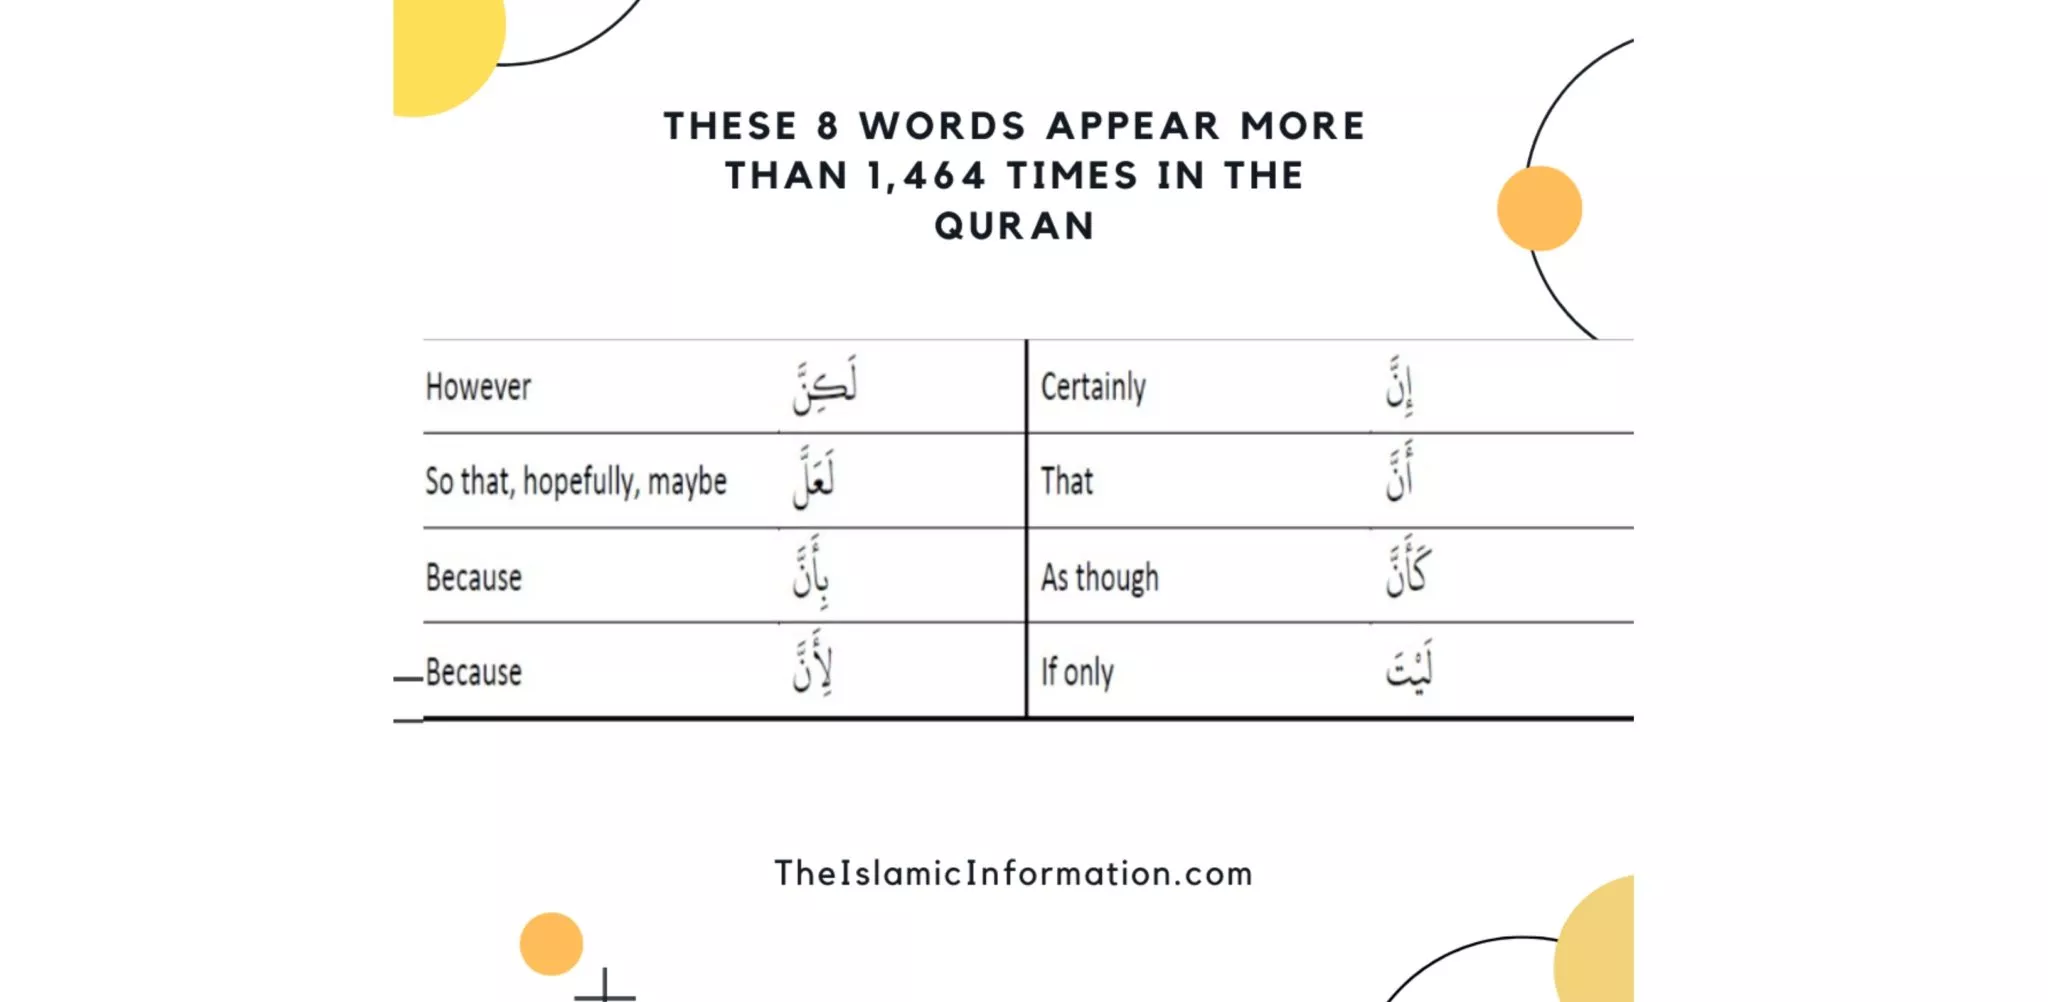 8 Words That Are Mentioned 1464 Times in The Holy Quran